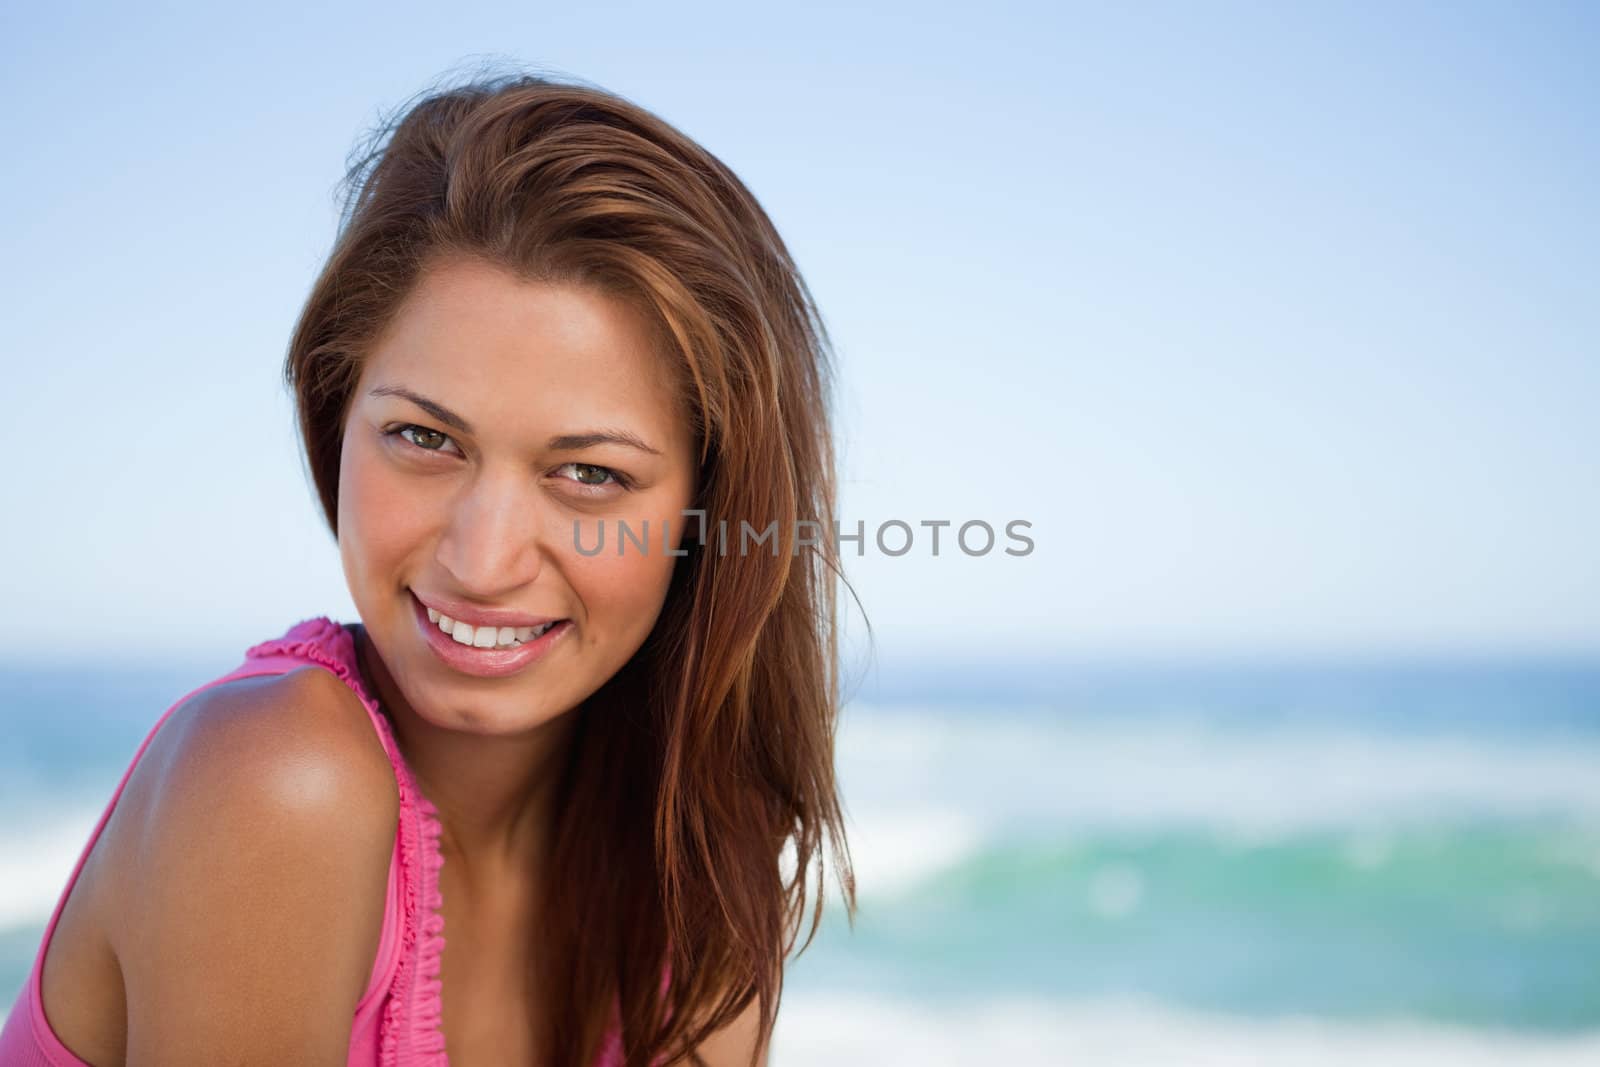 Young woman staring at the camera while sunbathing on the beach